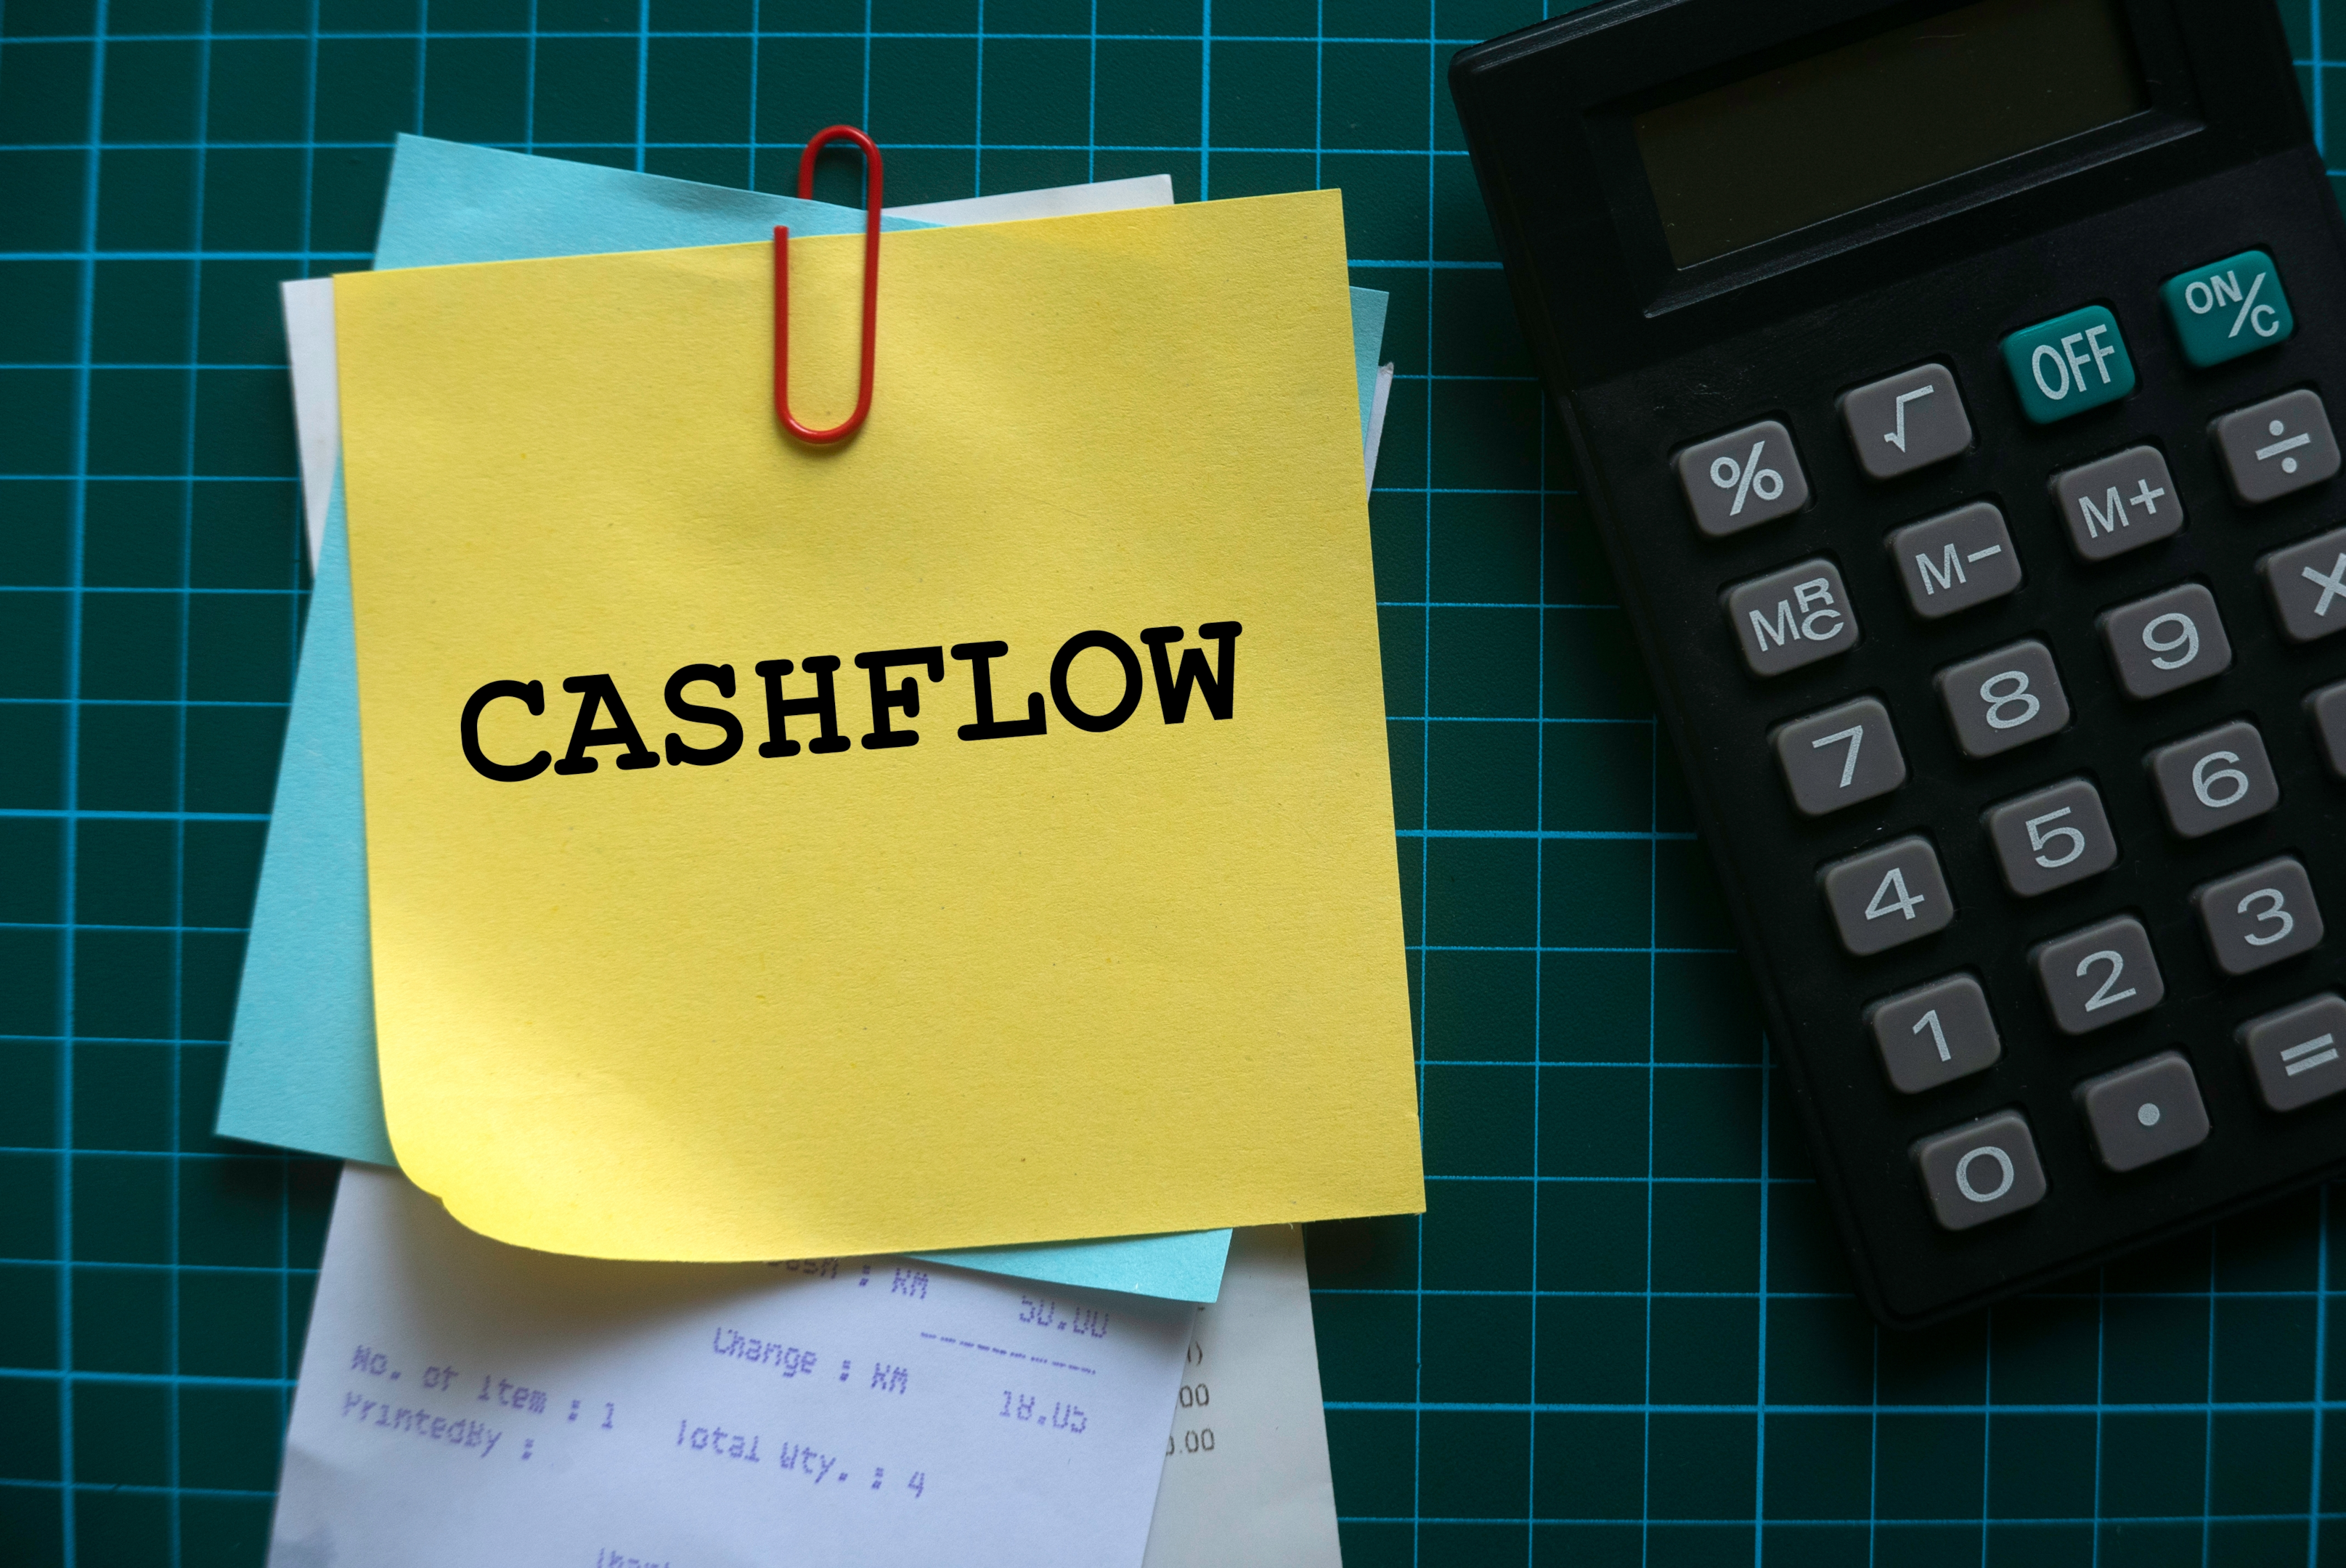 Ohio Cashflow prides a true hands-off investing on their whole process while the owner enjoys a steady cash flow.